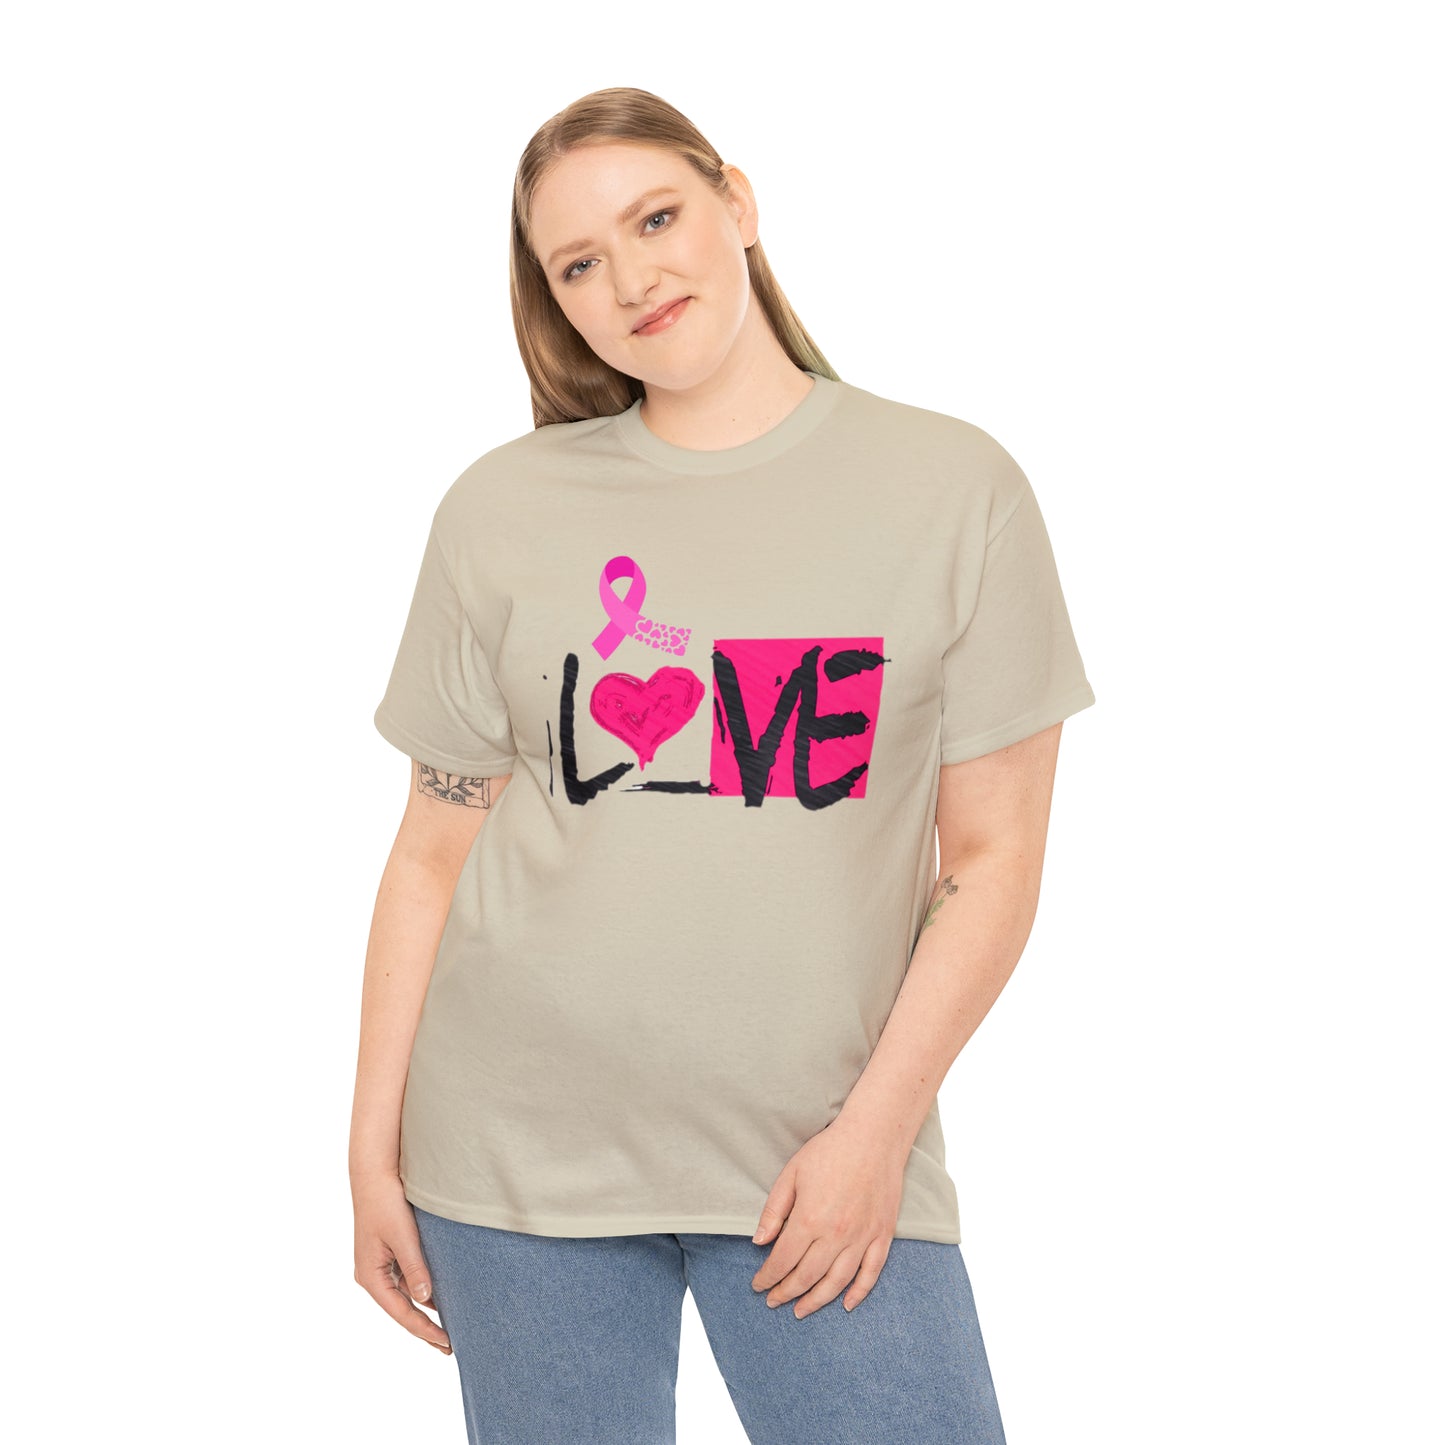 🎀Breast Cancer Awareness L♥️VE Tee/ Sean Breed Edition🎀